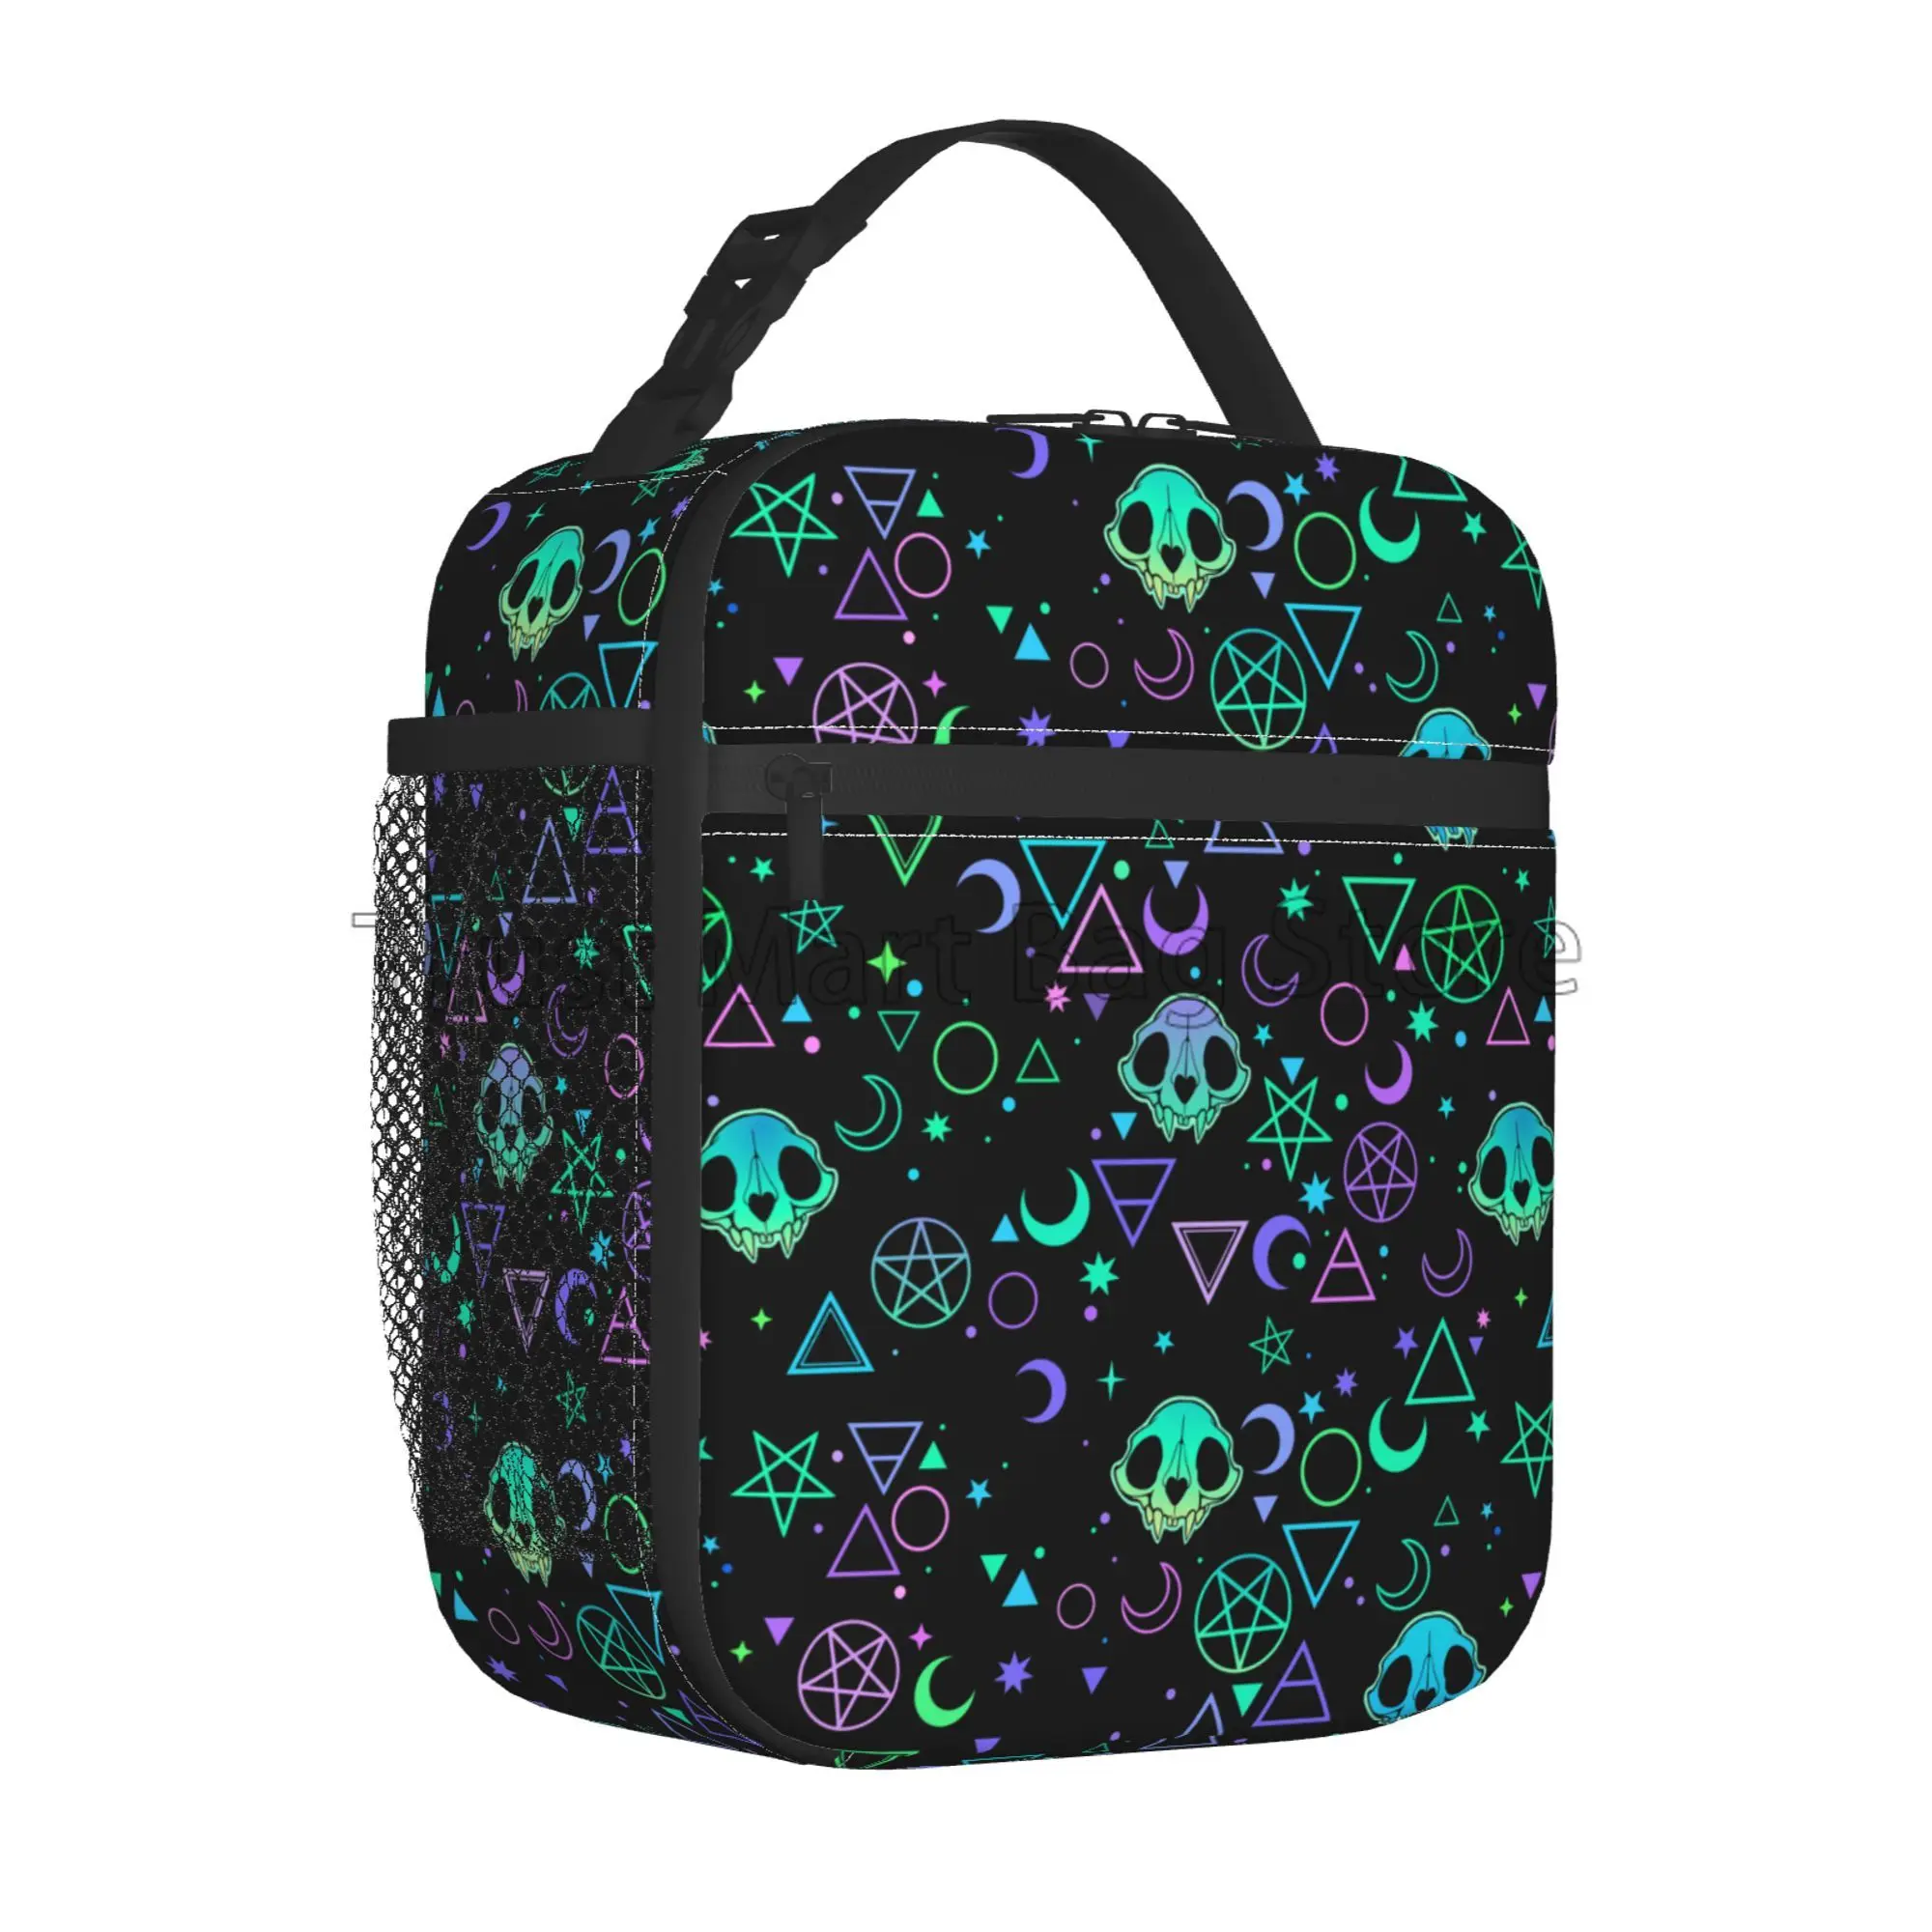 

Magic Skulls Insulated Lunch Bag Reusable Portable Waterproof Lunch Box Cooler Thermal Oxford Bento Tote for Work Picnic Travel